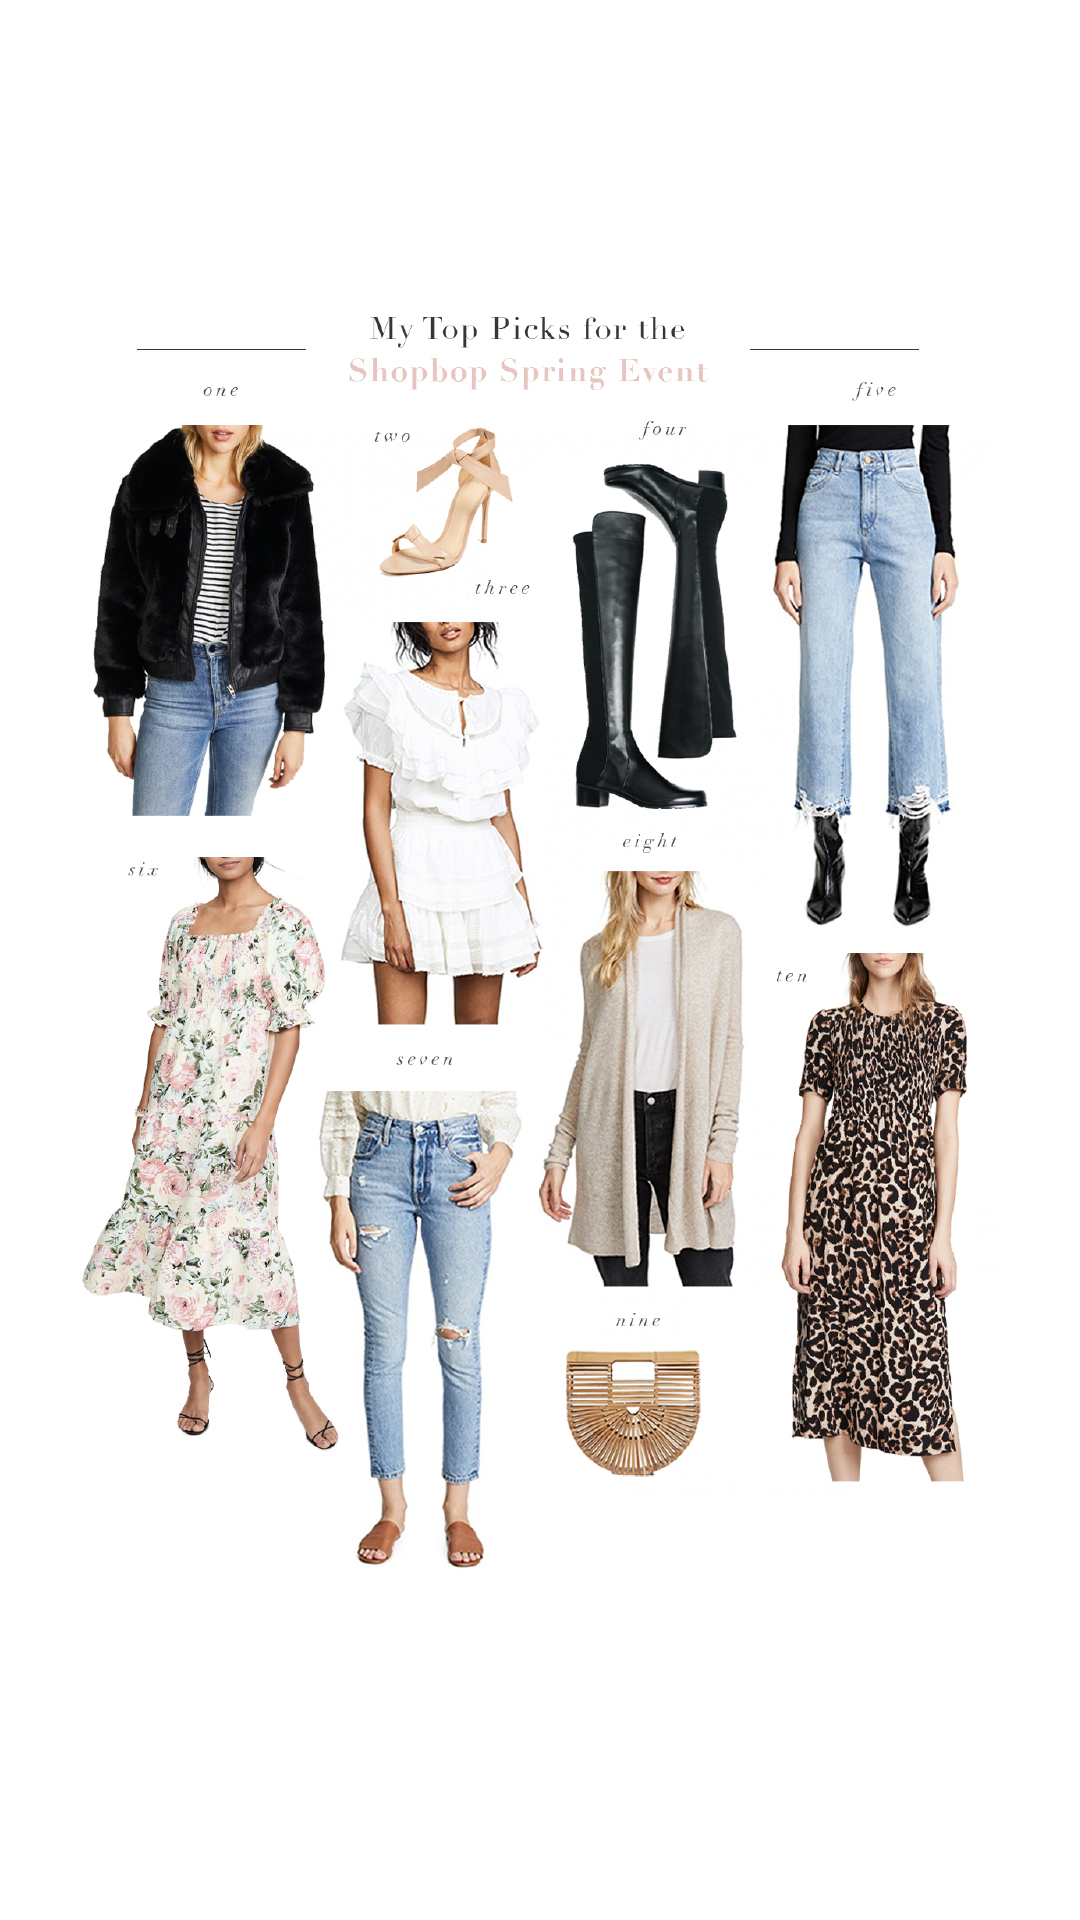 My Top Picks: Shopbop Spring Event... - Rach Parcell